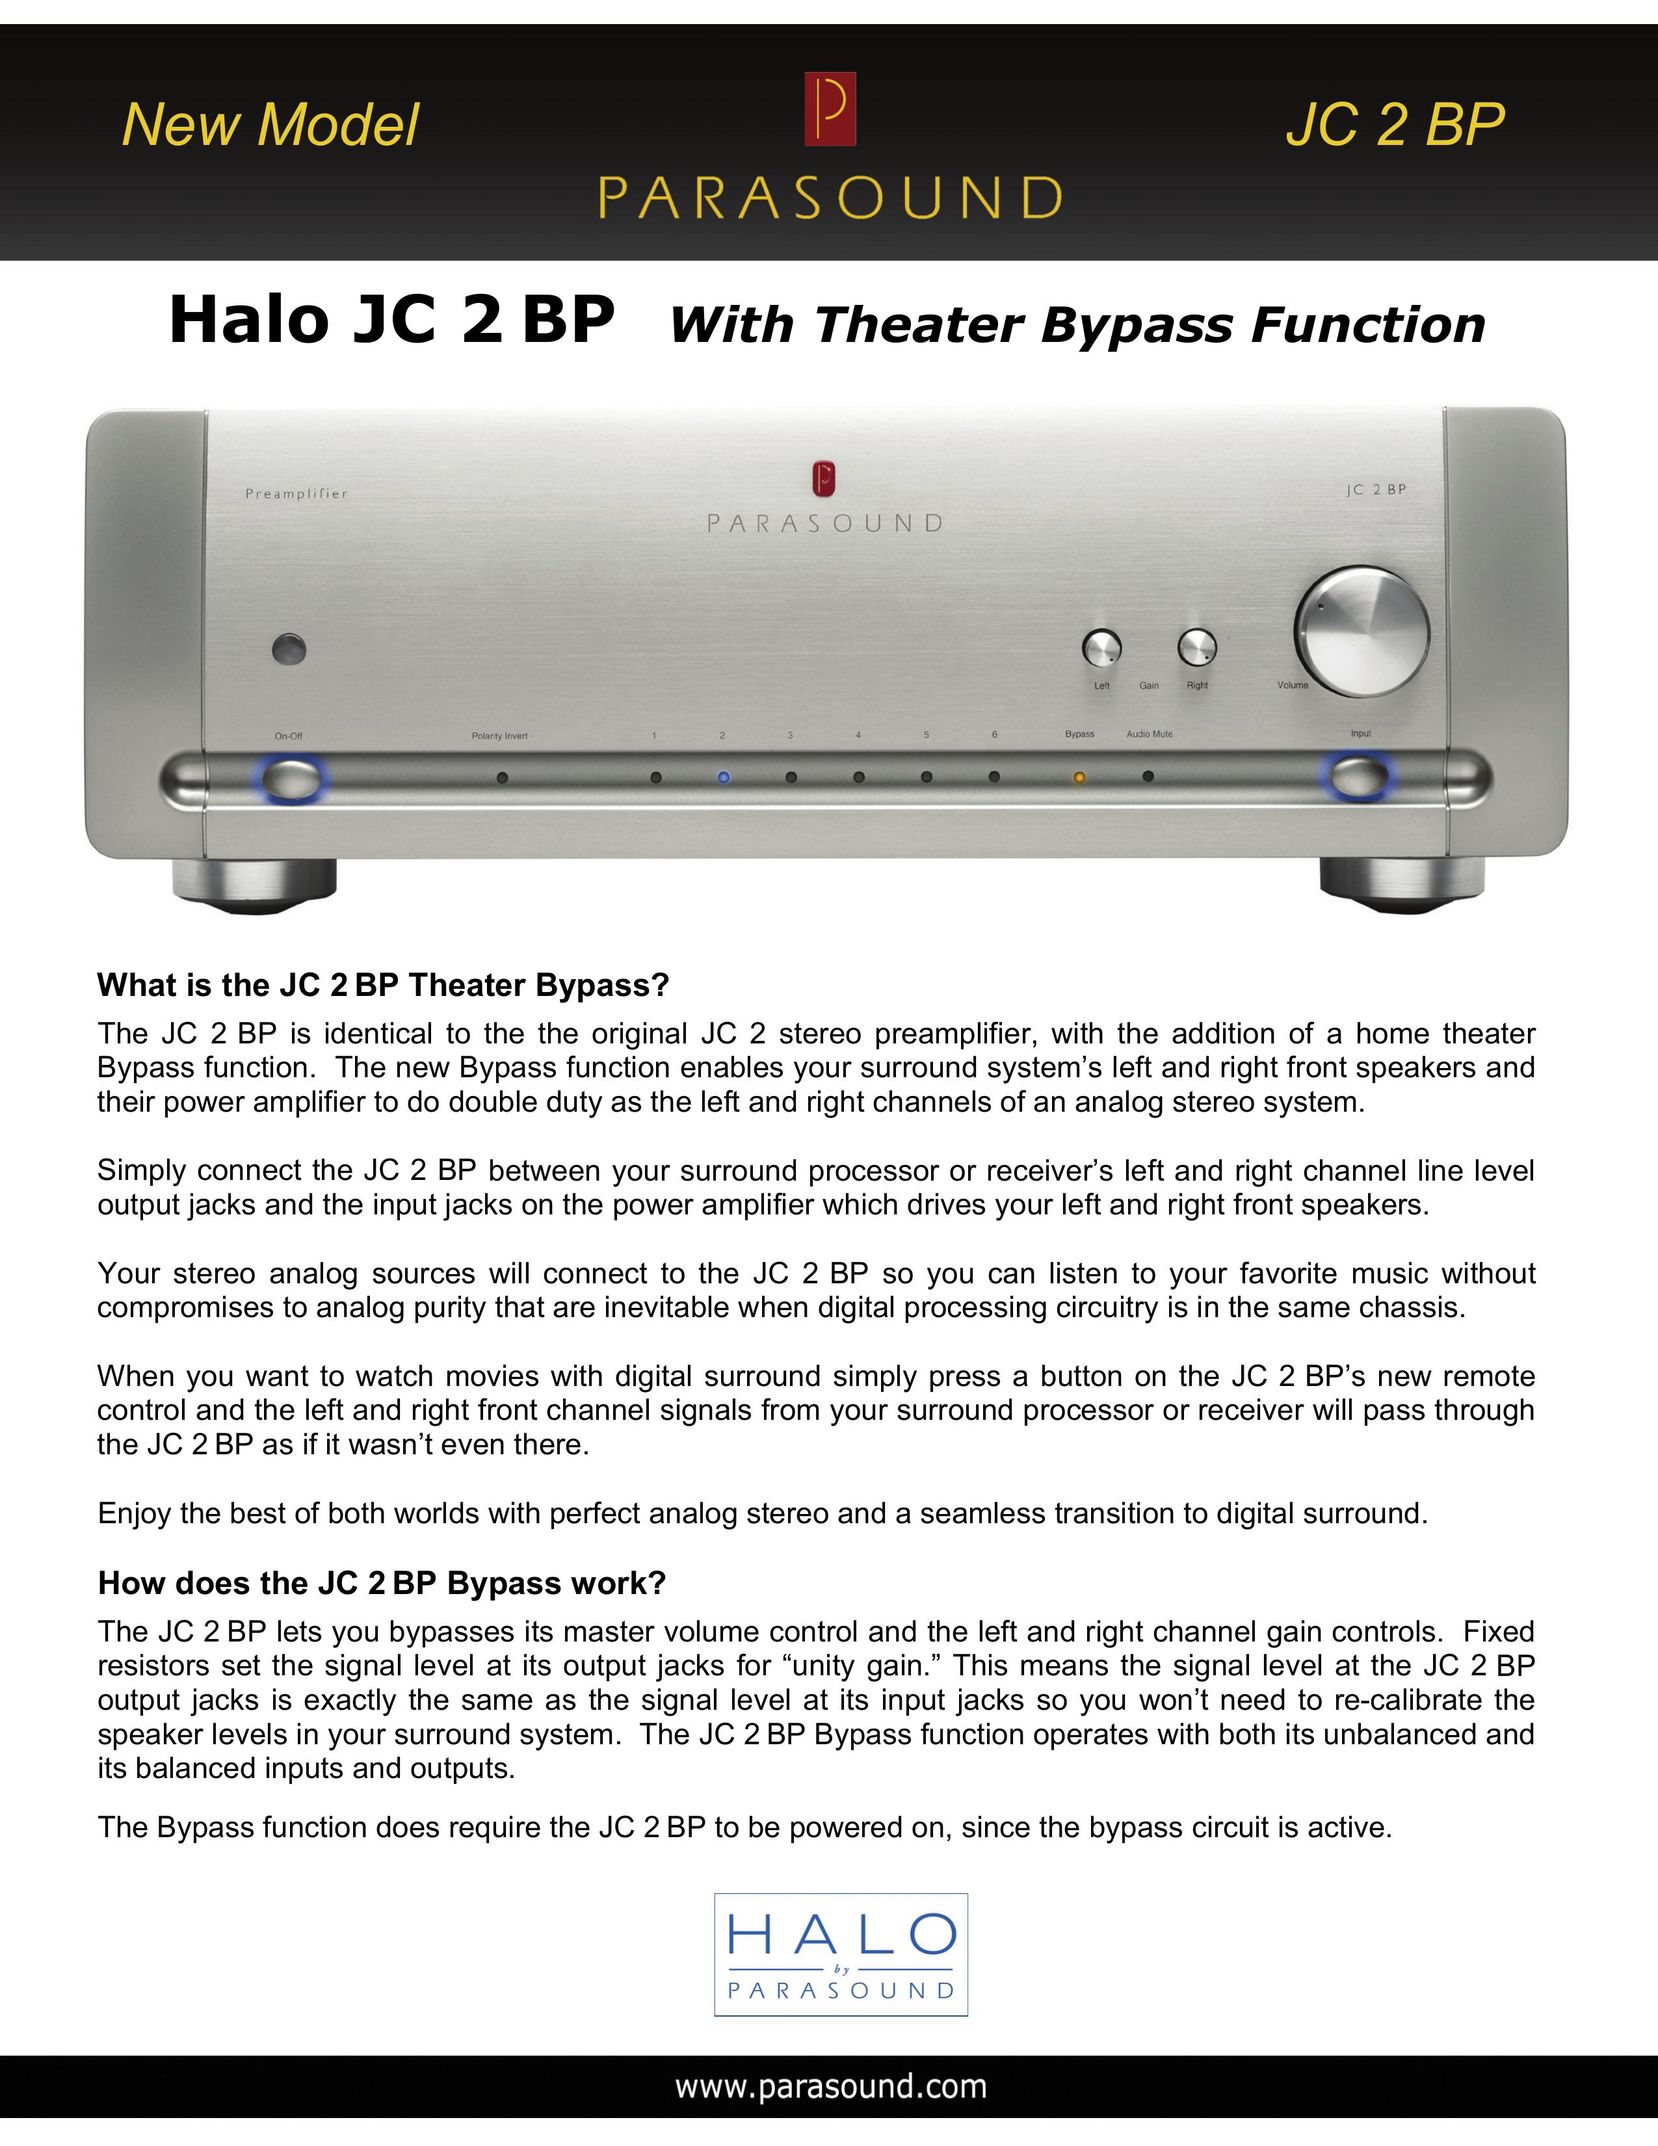 Parasound JC 2 BP Home Theater System User Manual